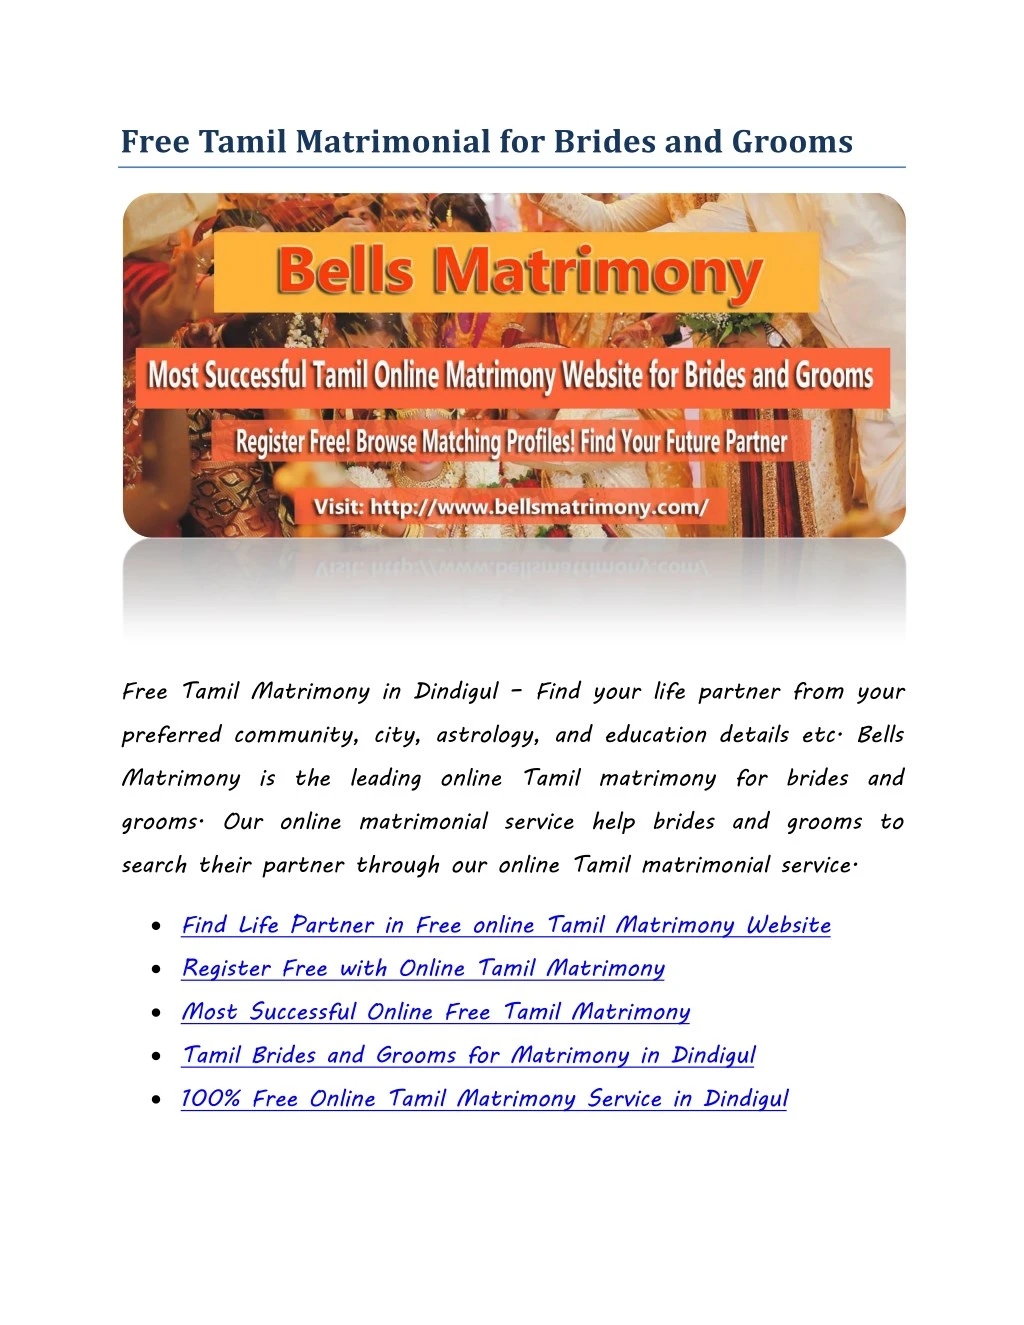 free tamil matrimonial for brides and grooms